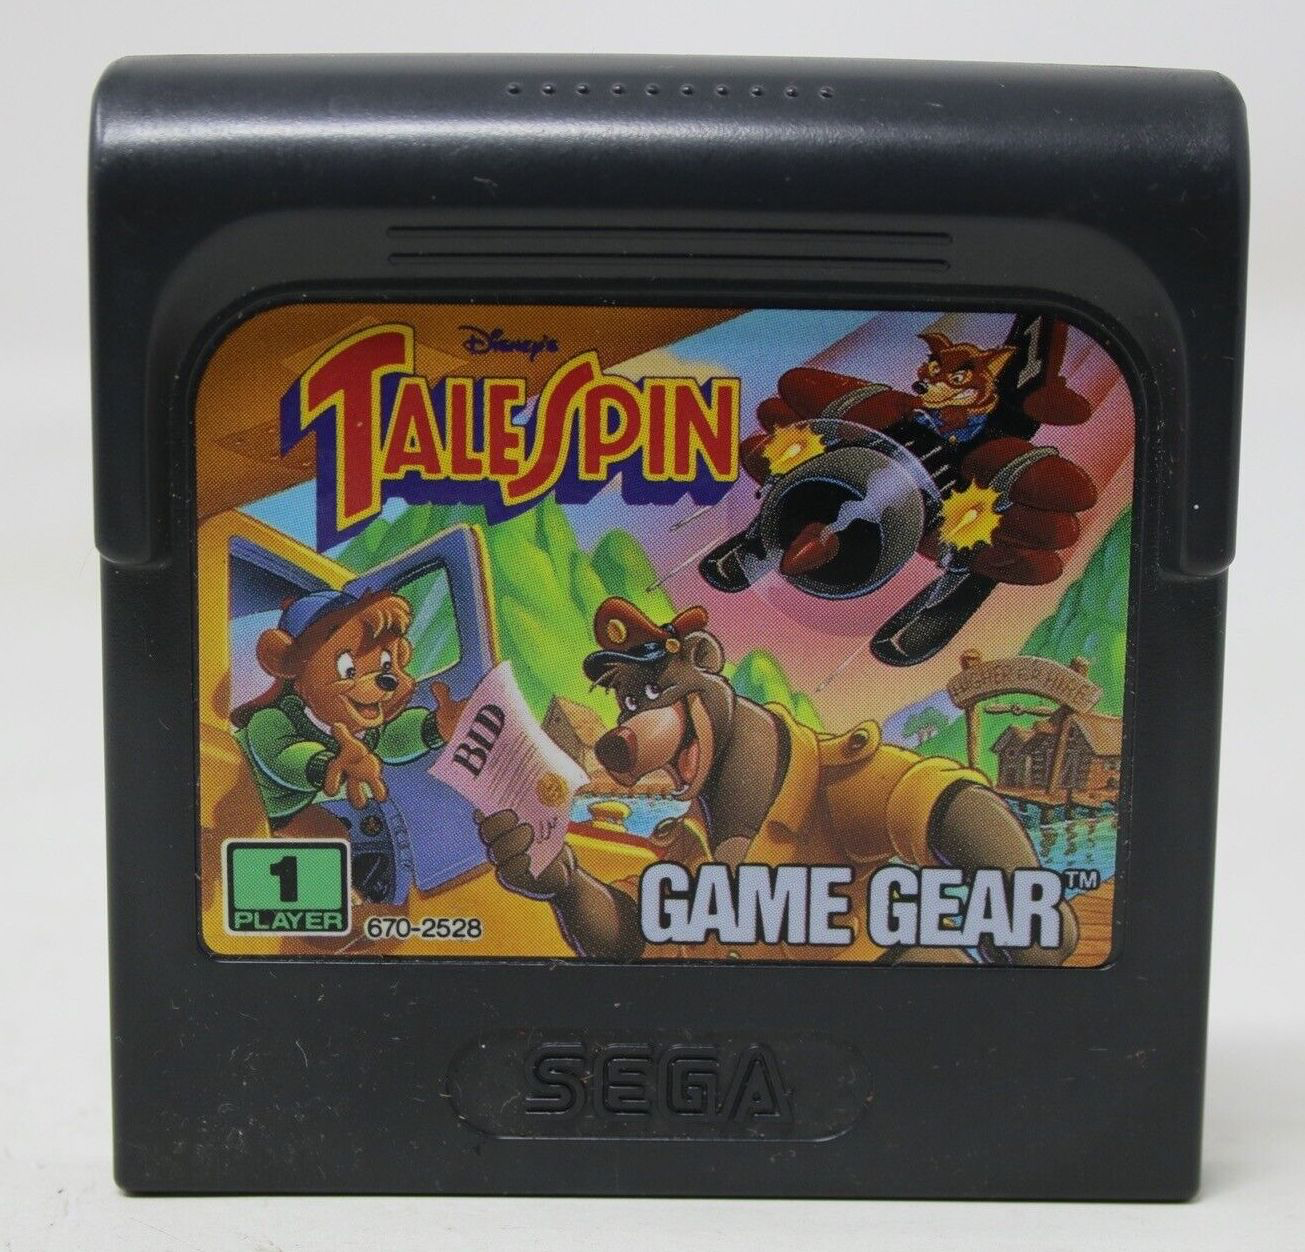 TaleSpin - Game Gear